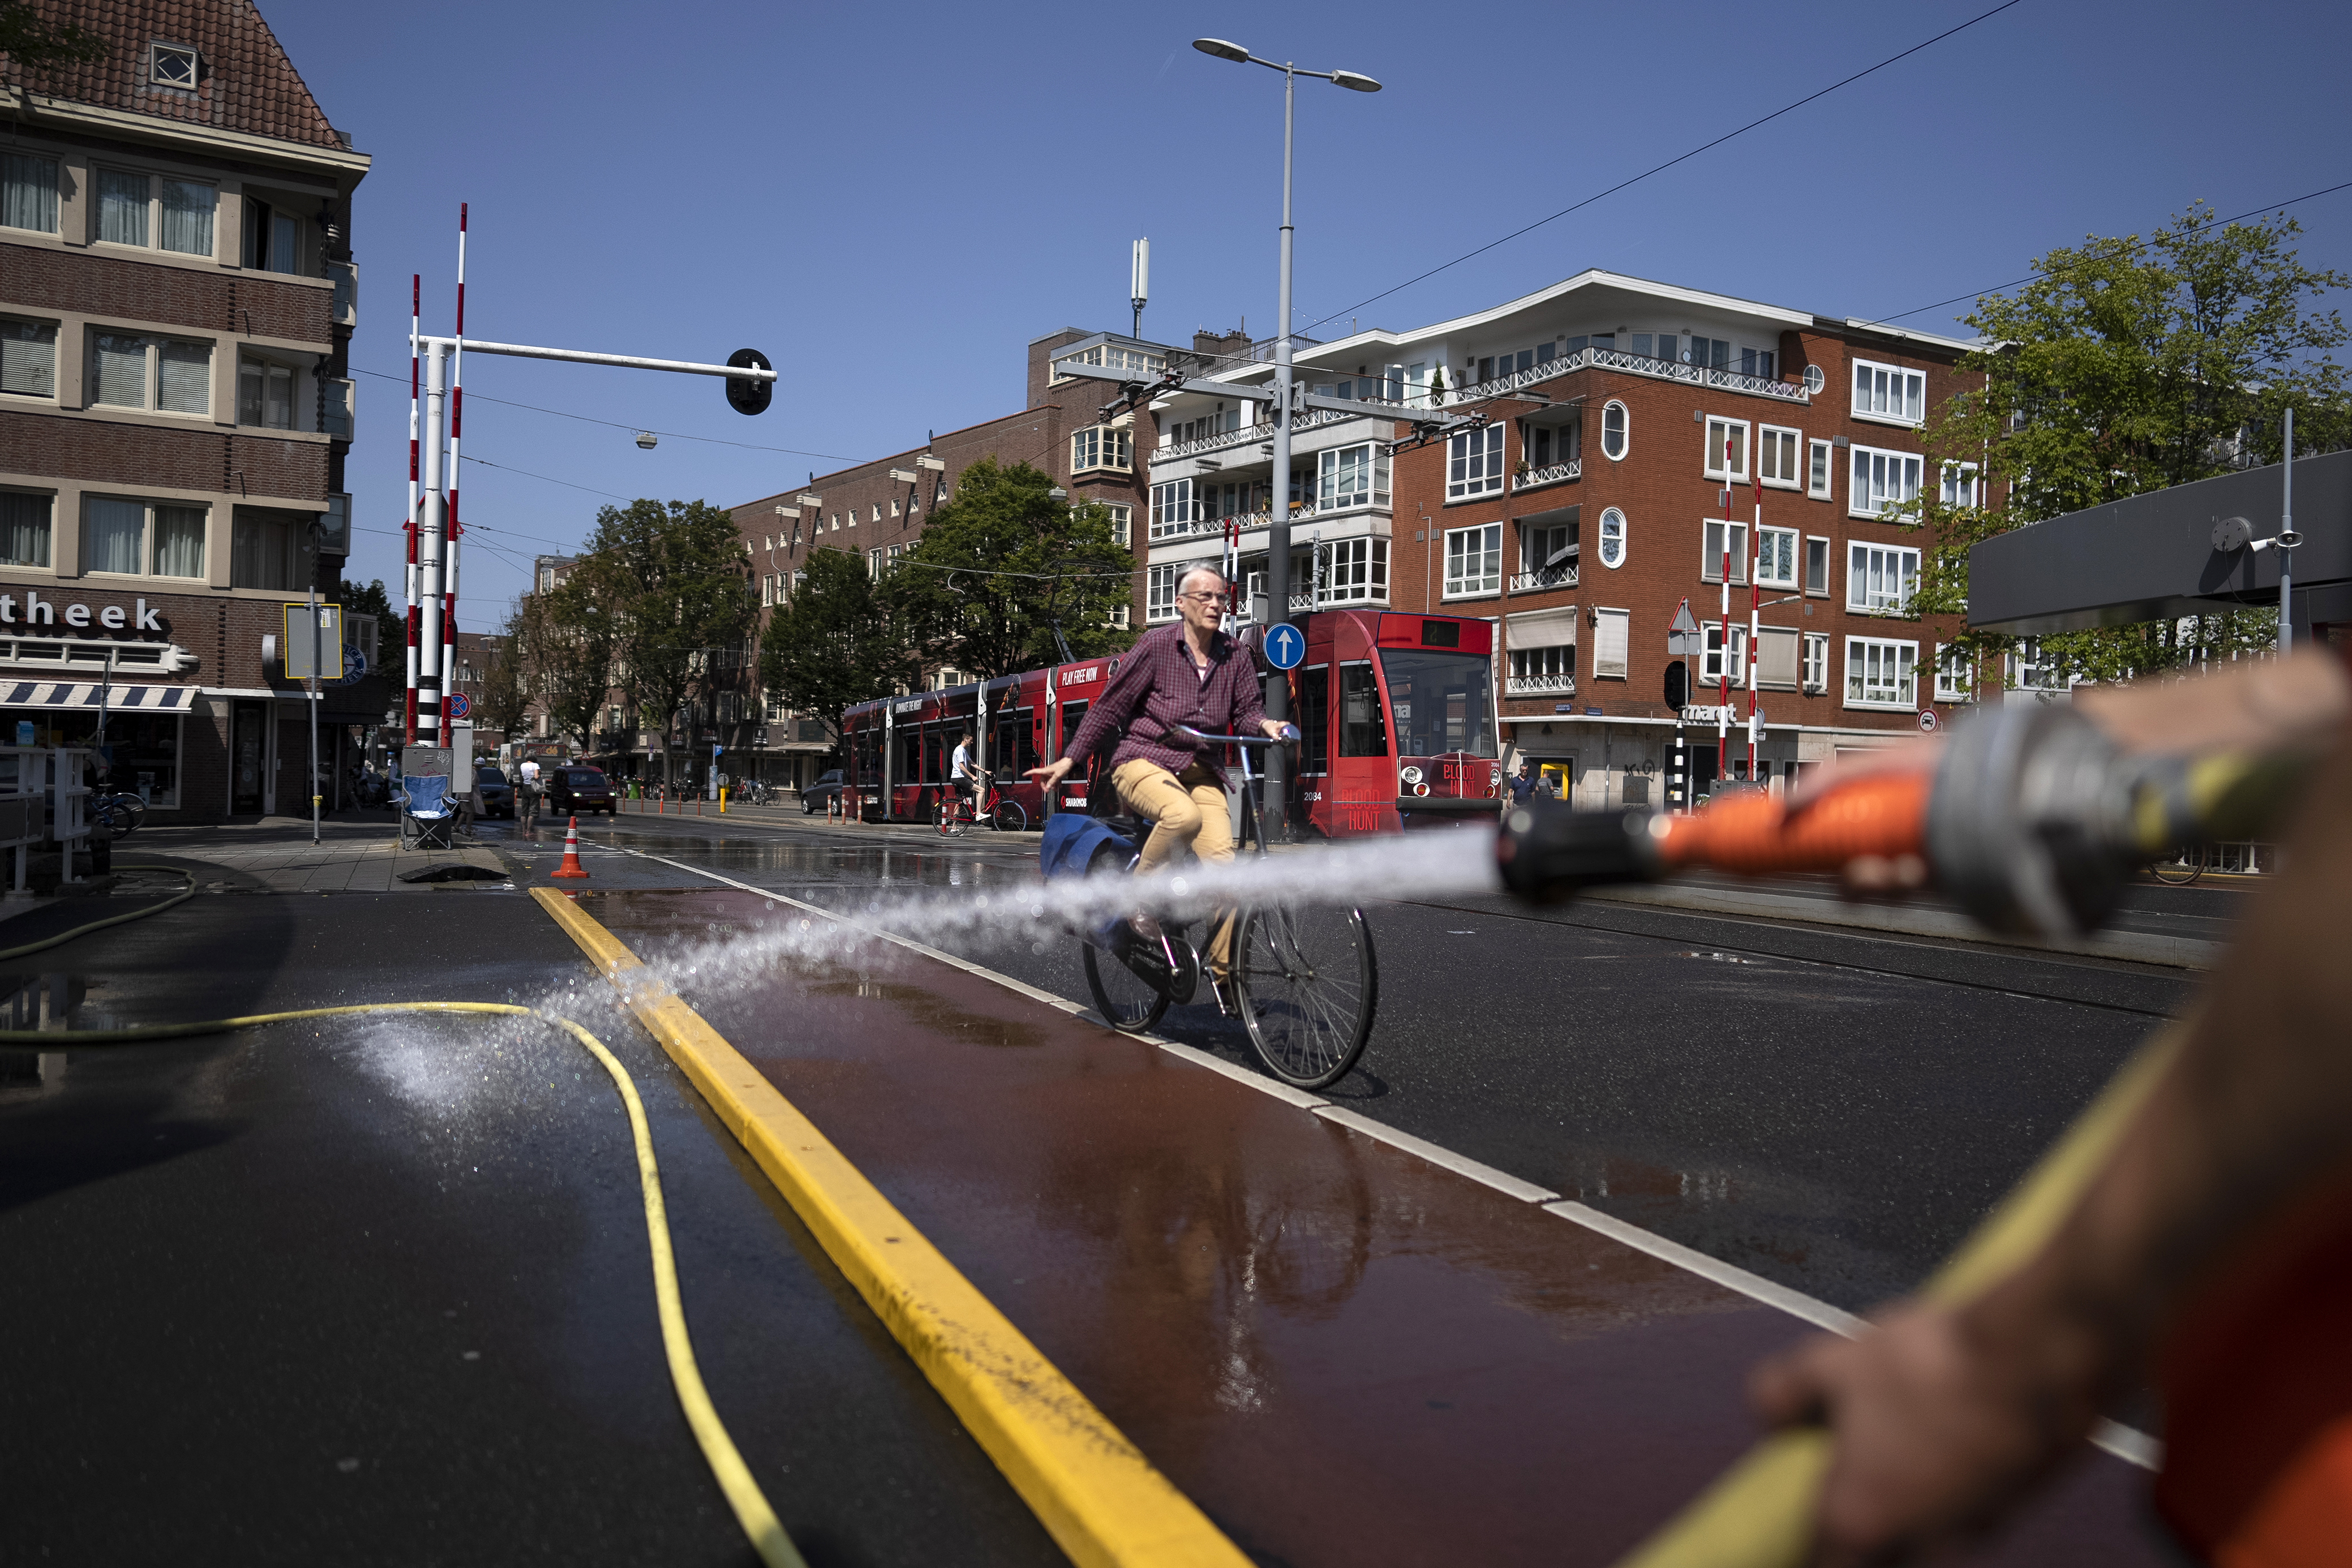 A bicyclist rides by a hose spraying water onto the road surface of a nearby bridge.